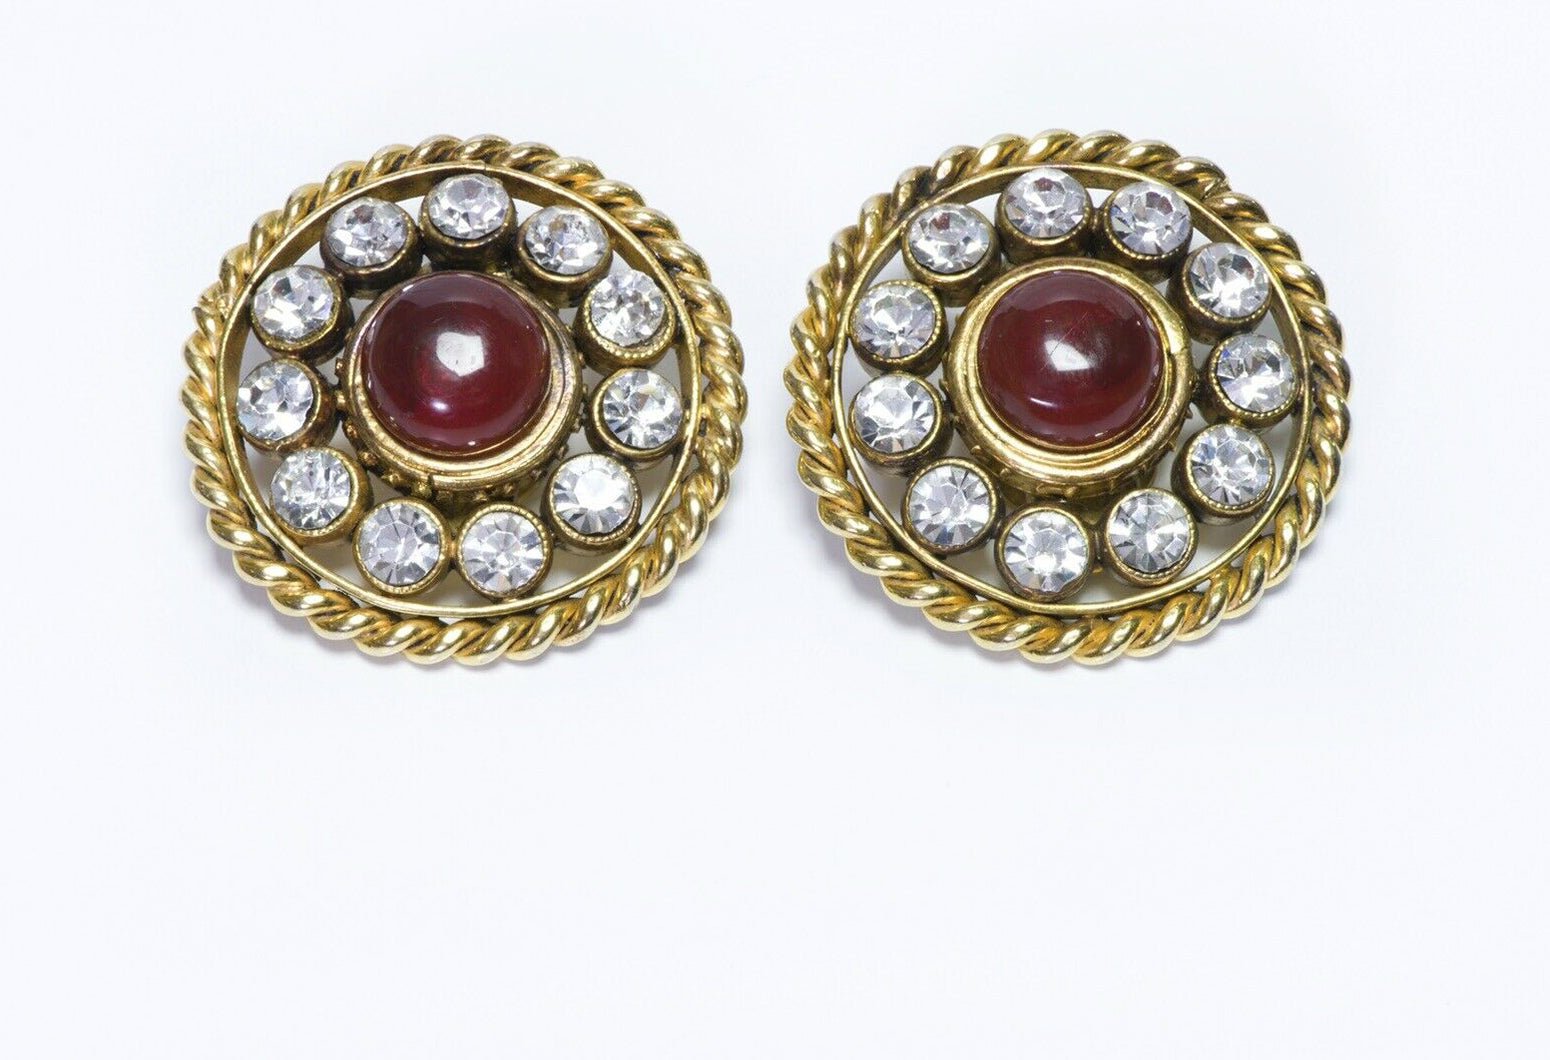 CHANEL Paris Maison Gripoix 1980’s Red Glass Crystal Round Earrings - DSF Antique Jewelry